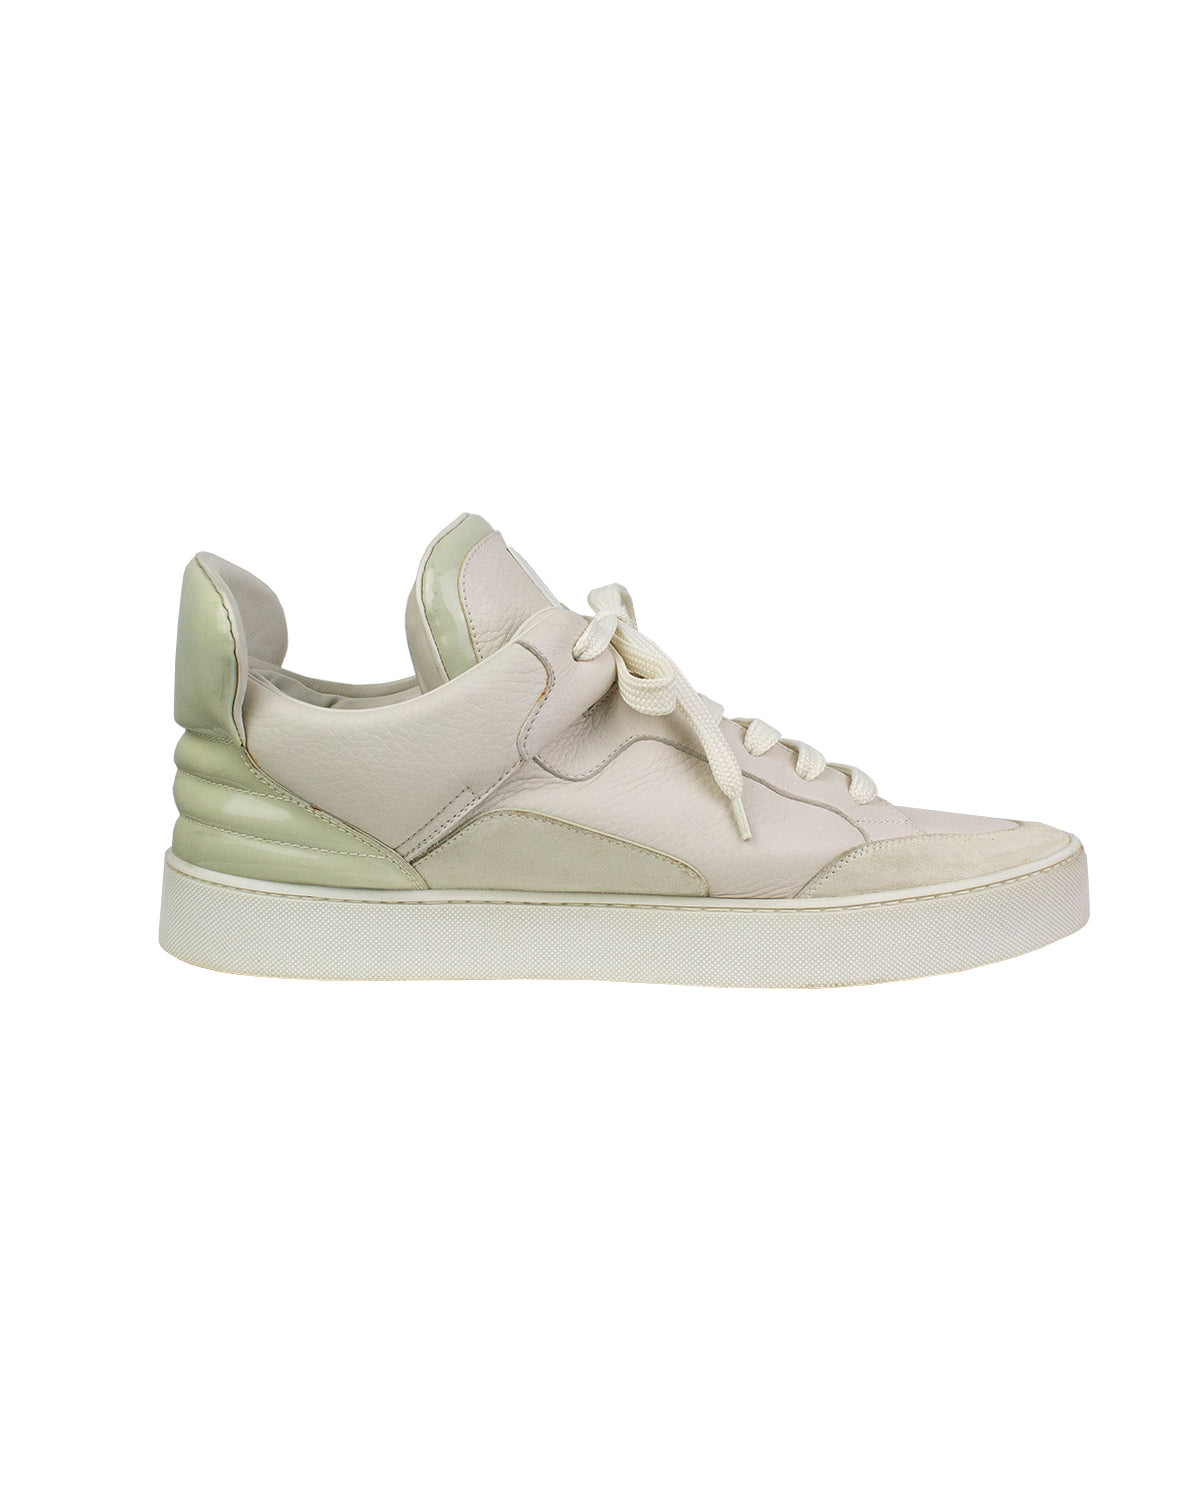 LOUIS VUITTON X KANYE WEST Calfskin Suede Don Sneakers 8.5 Cream